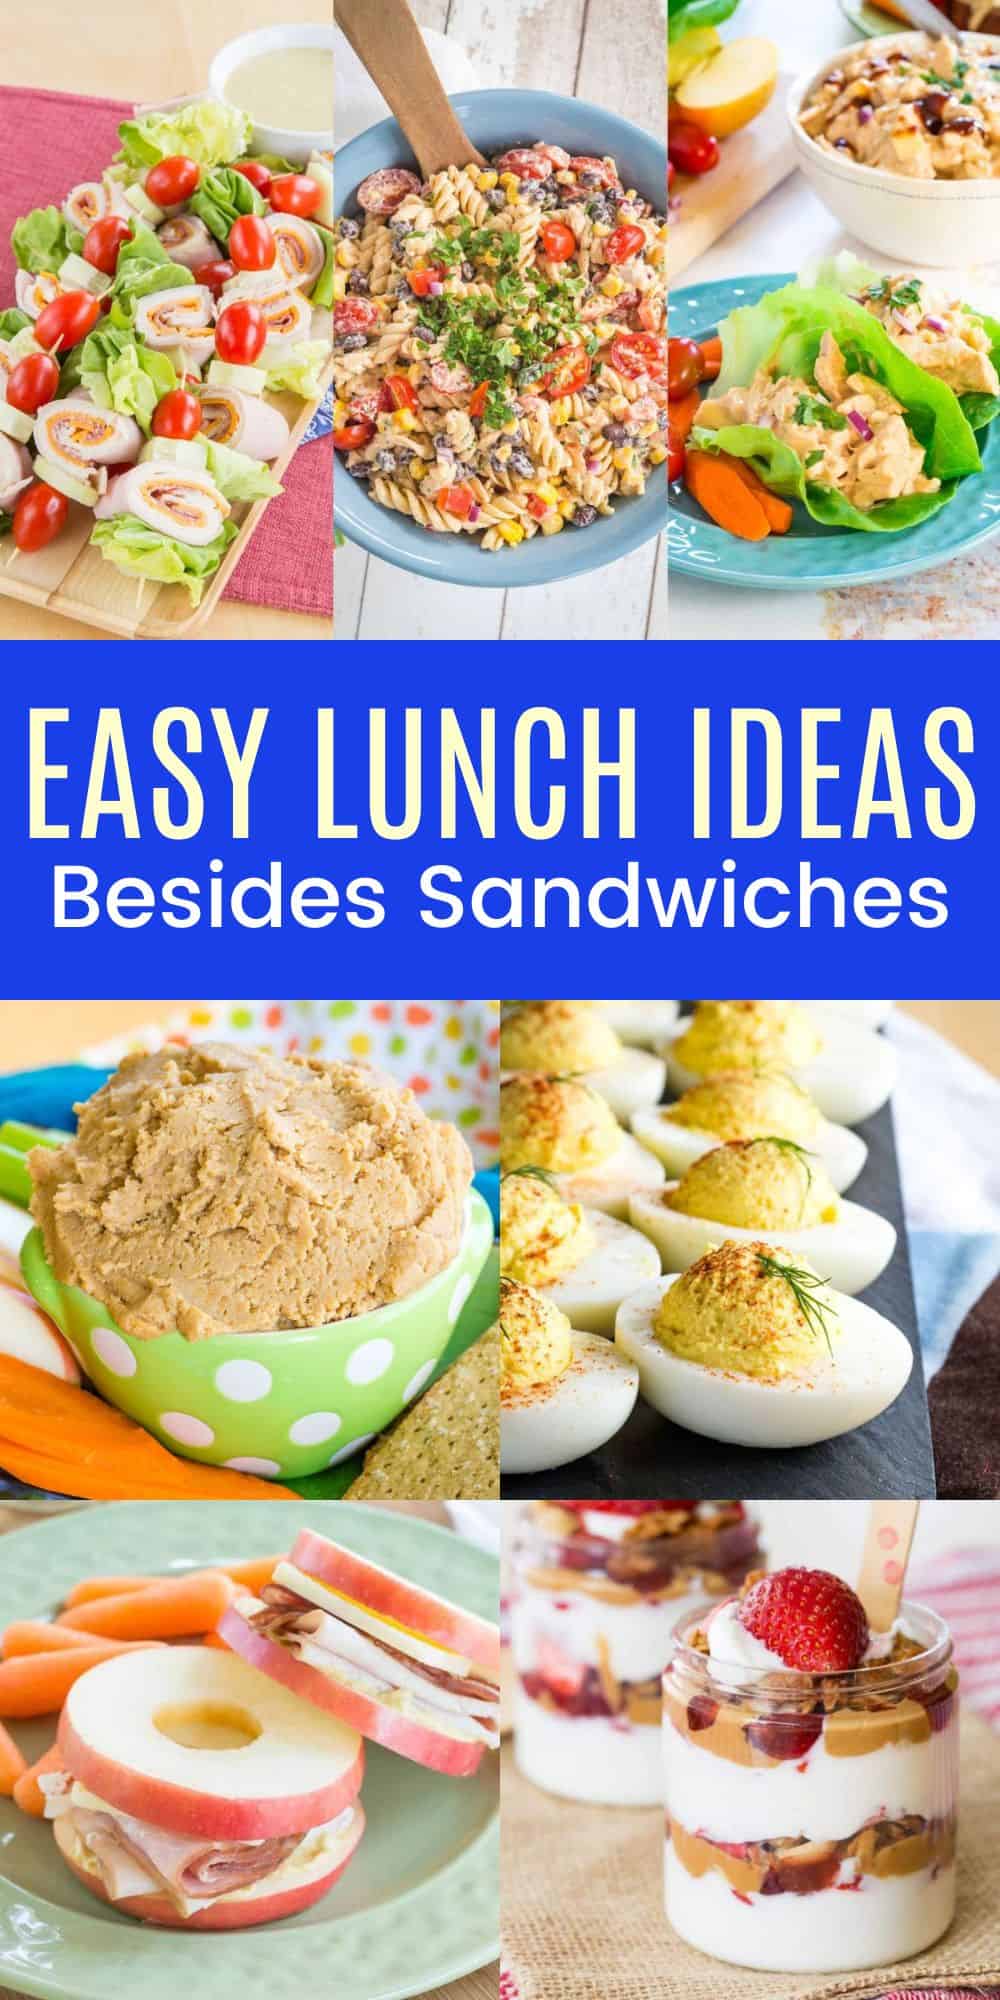 50+ Easy Lunch Ideas - No Sandwiches! | Cupcakes & Kale Chips